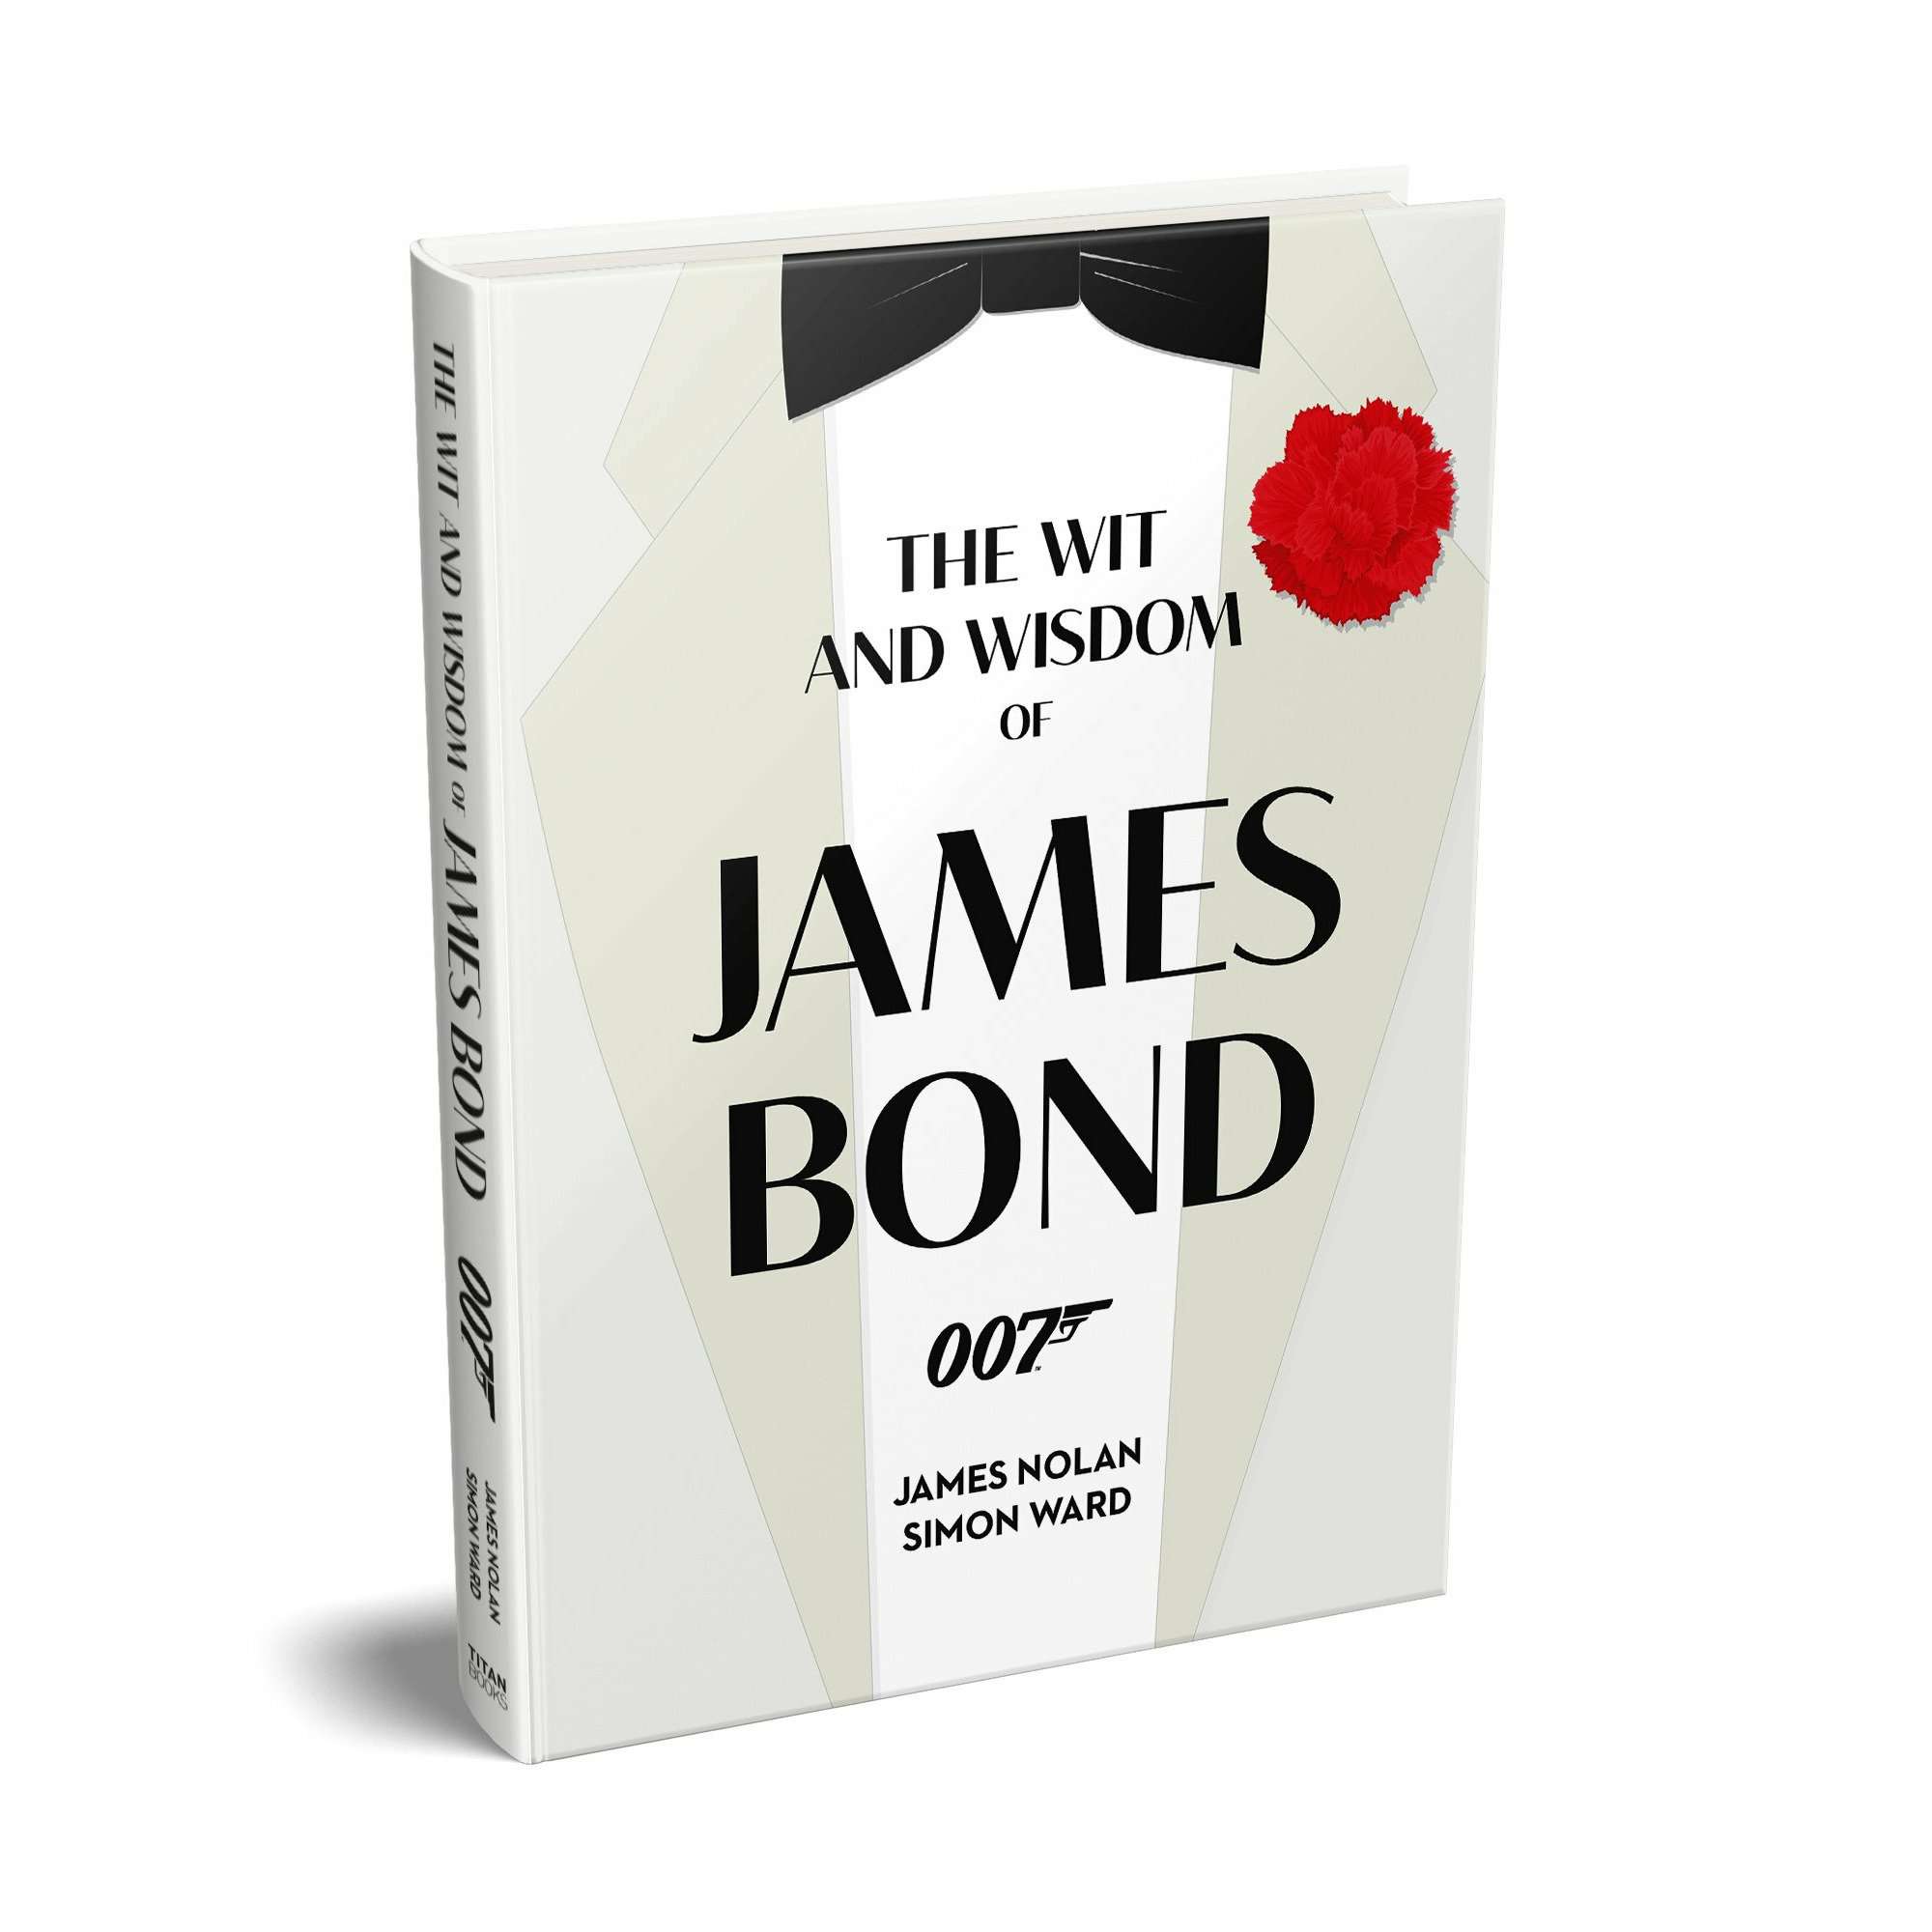 Official　of　The　Book　Bond　James　Wit　Wisdom　and　007Store